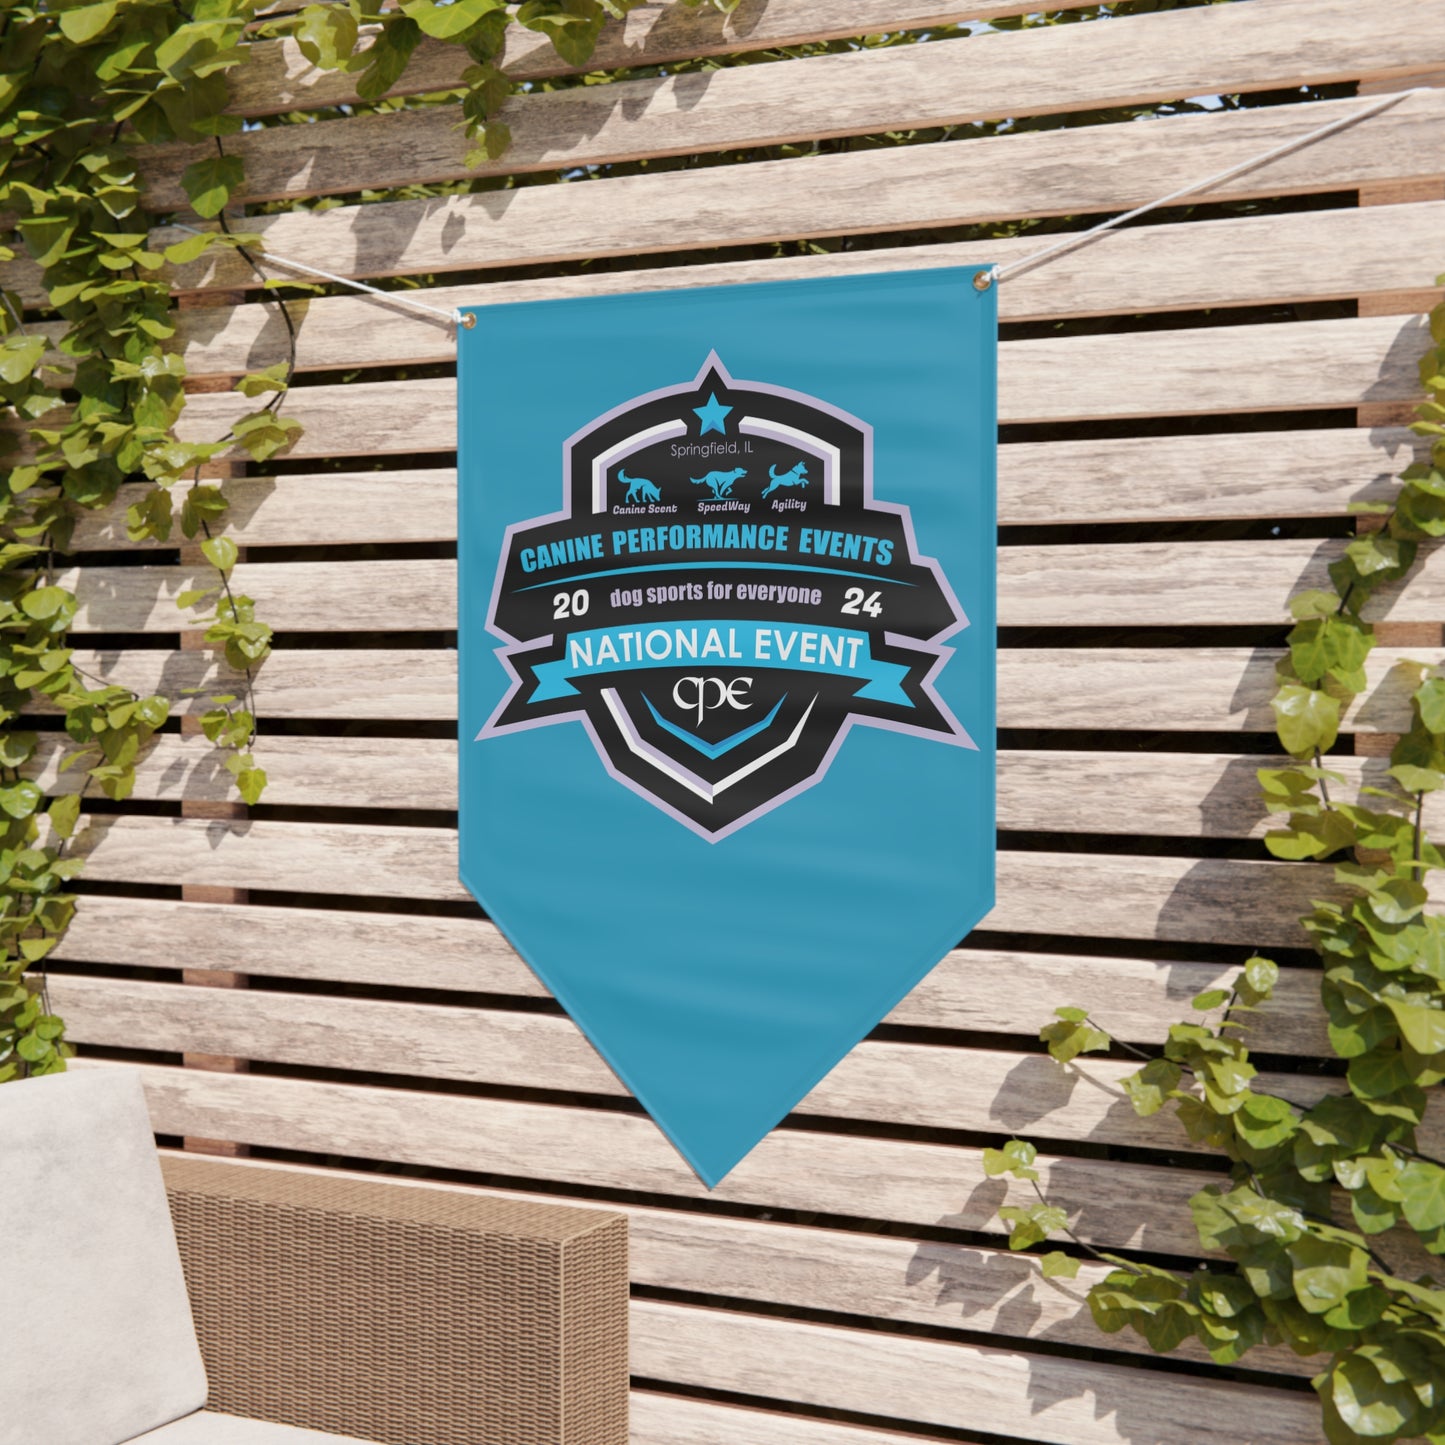 CPE NATIONALS Pennant Banner